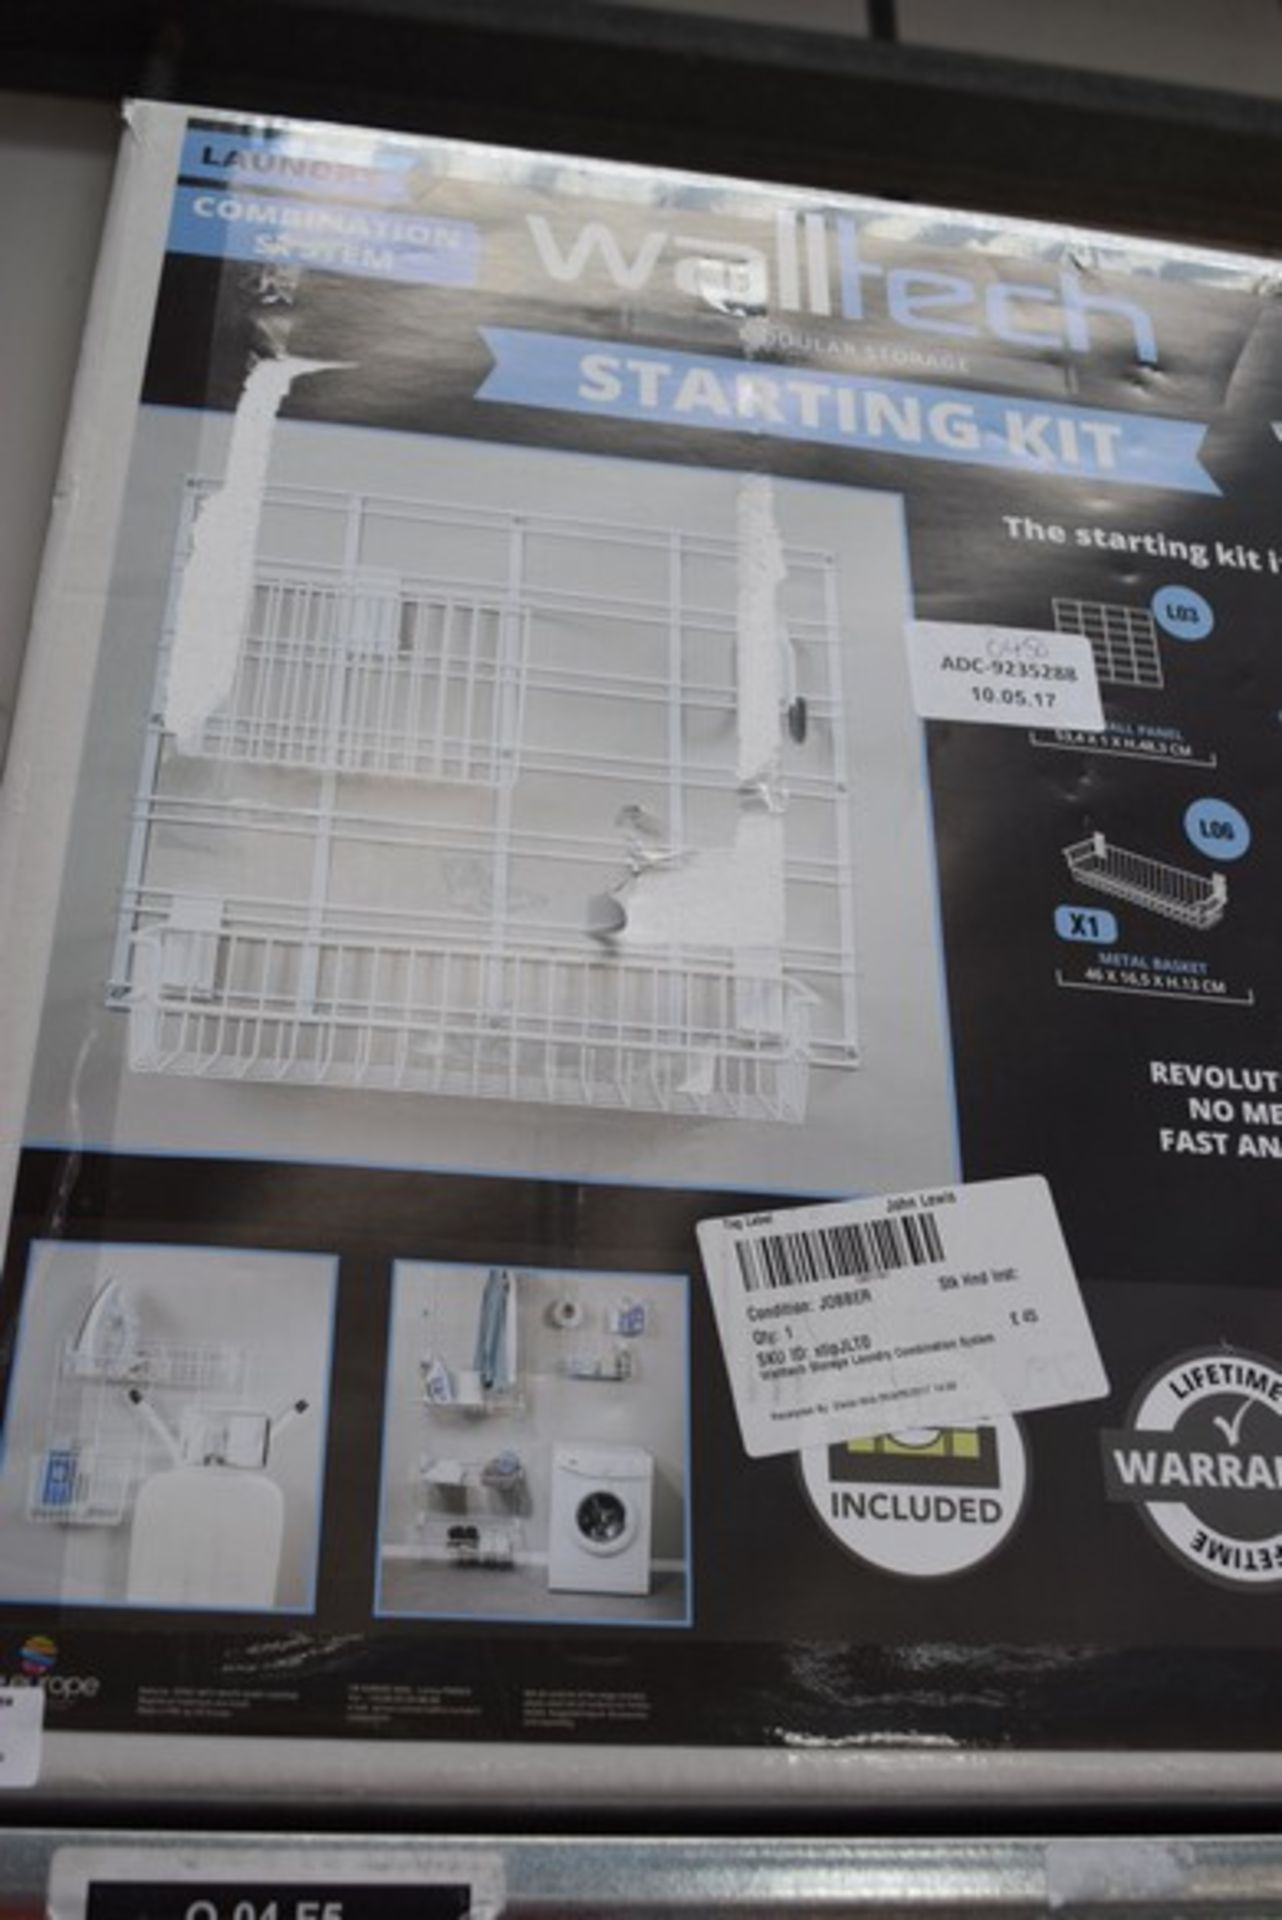 1 x BOXED WALL TECH MODULAR STARTING KIT LAUNDRY COMBINATION SYSTEM RRP £45 10.05.2017 *PLEASE